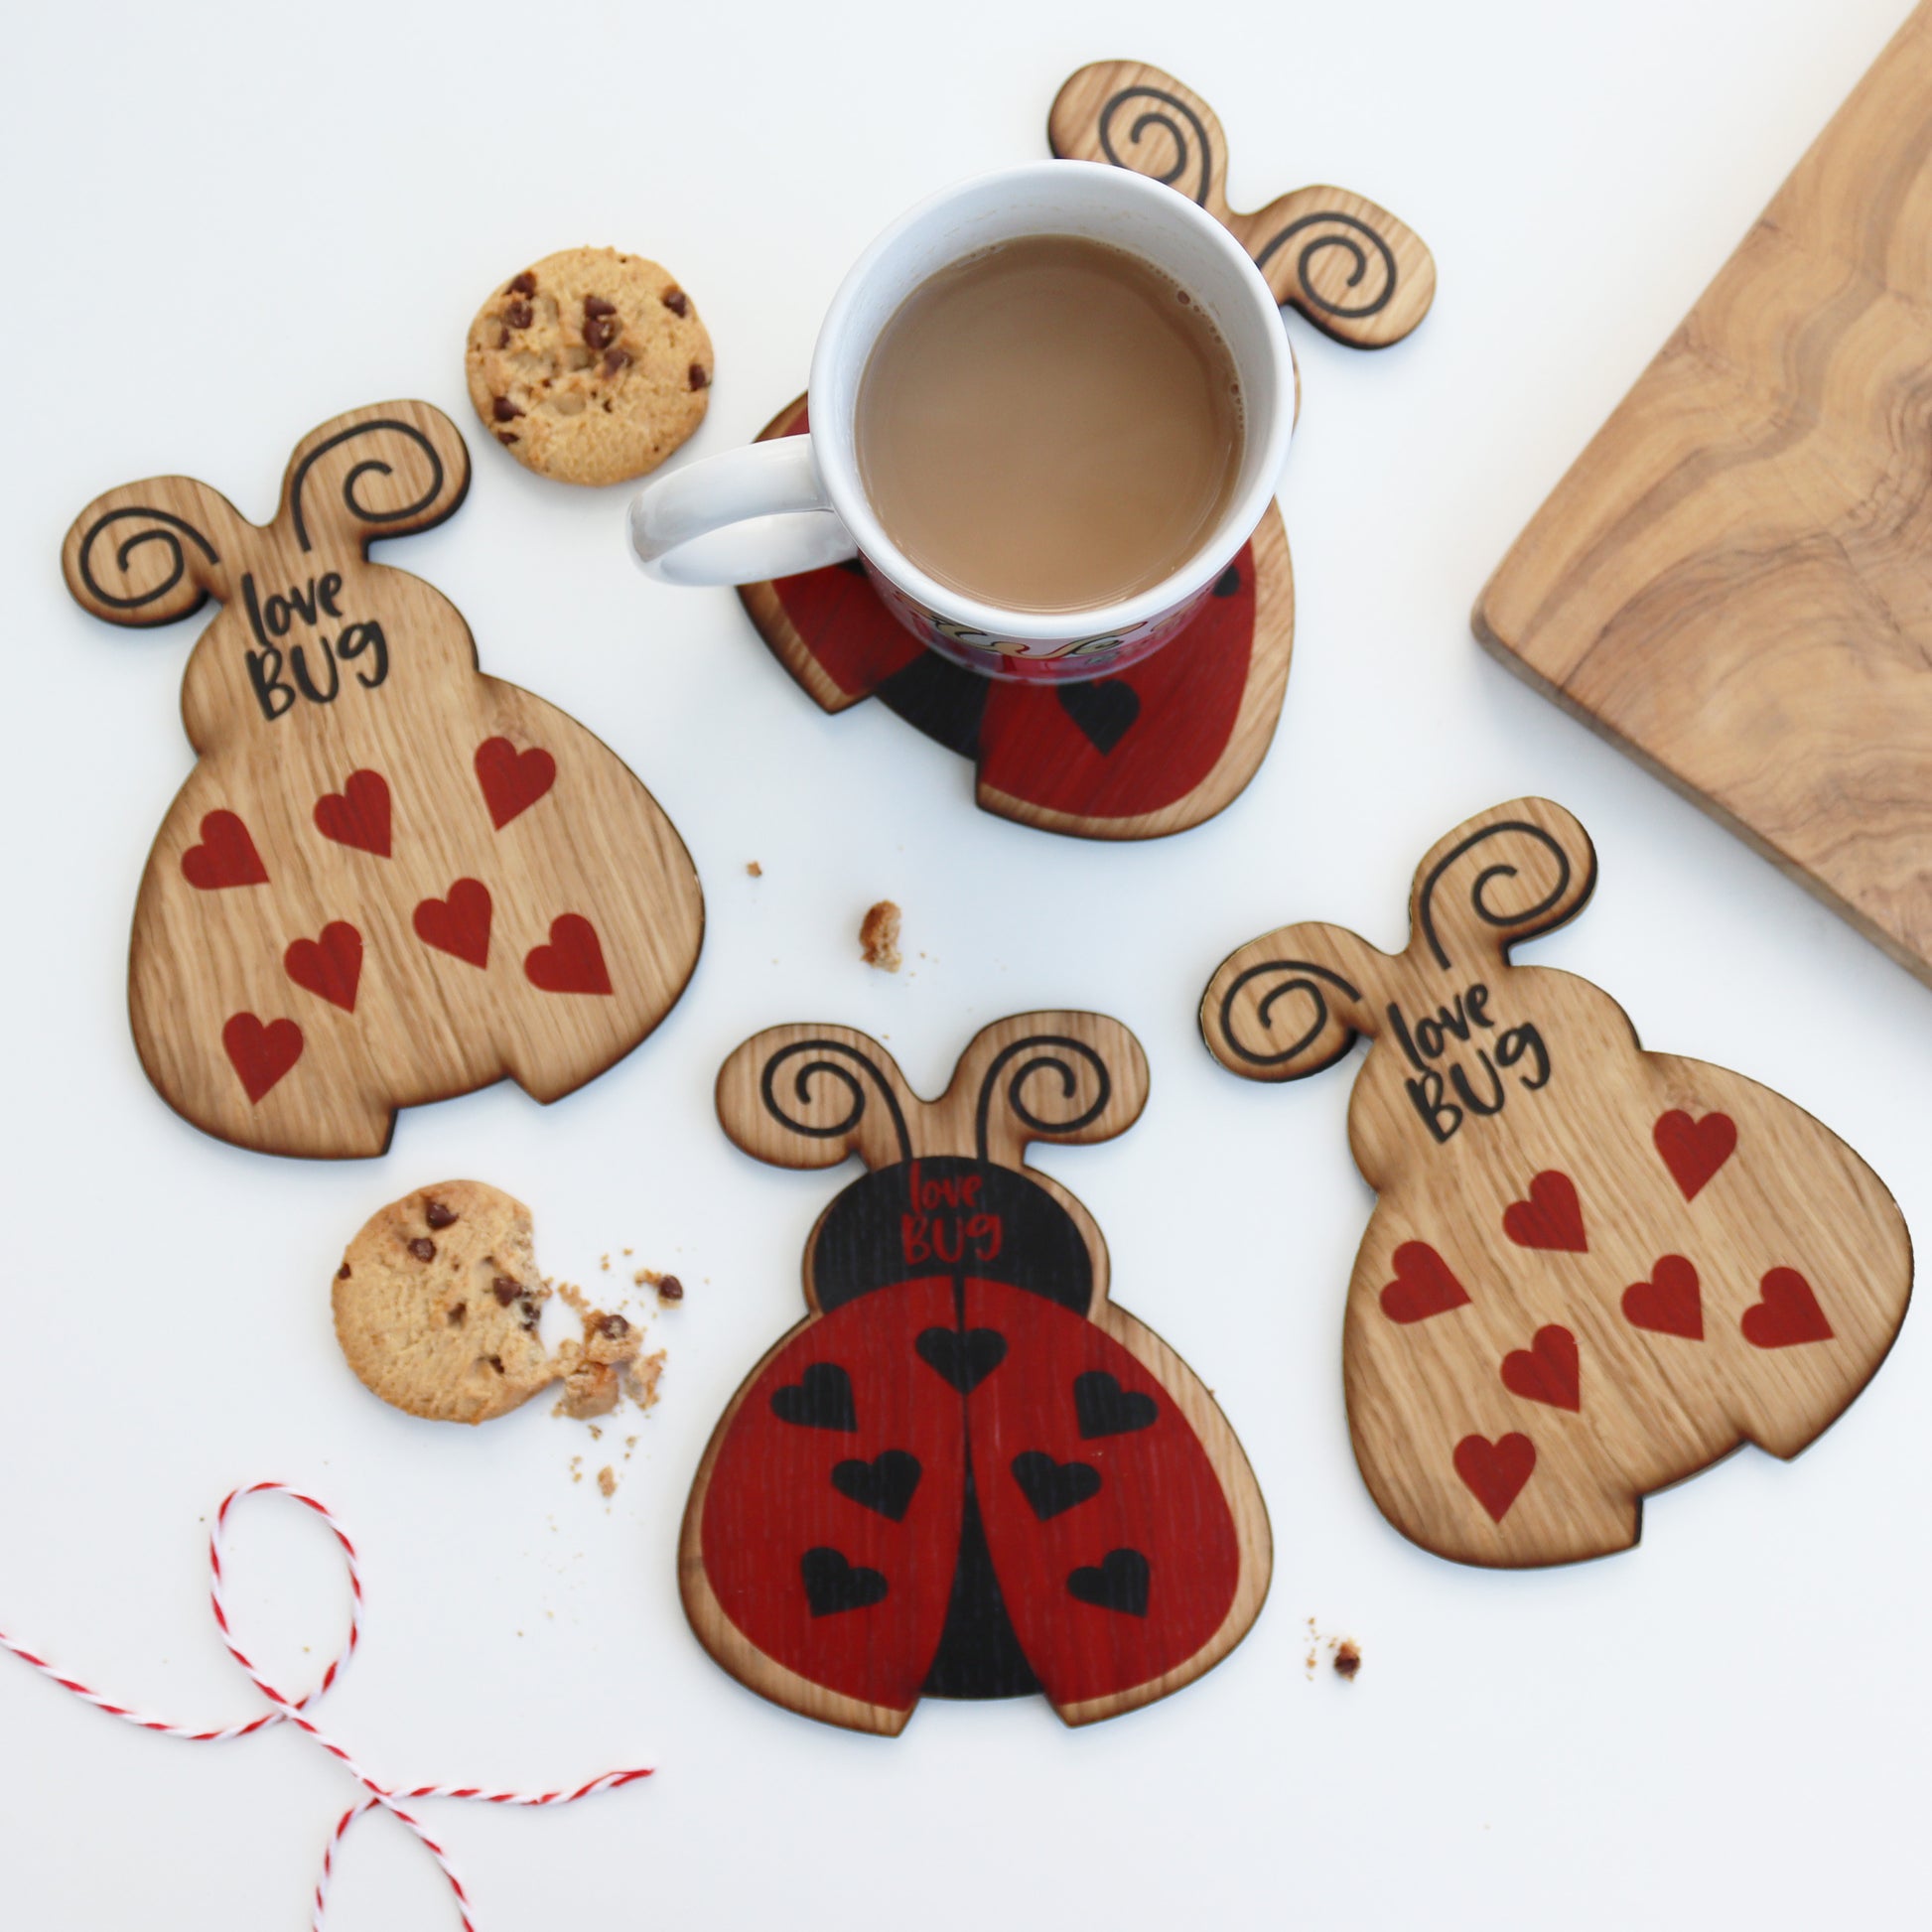 set of 4 wooden ladybird coasters 2 with a printed love bug and 2 with hearts valentines coasters